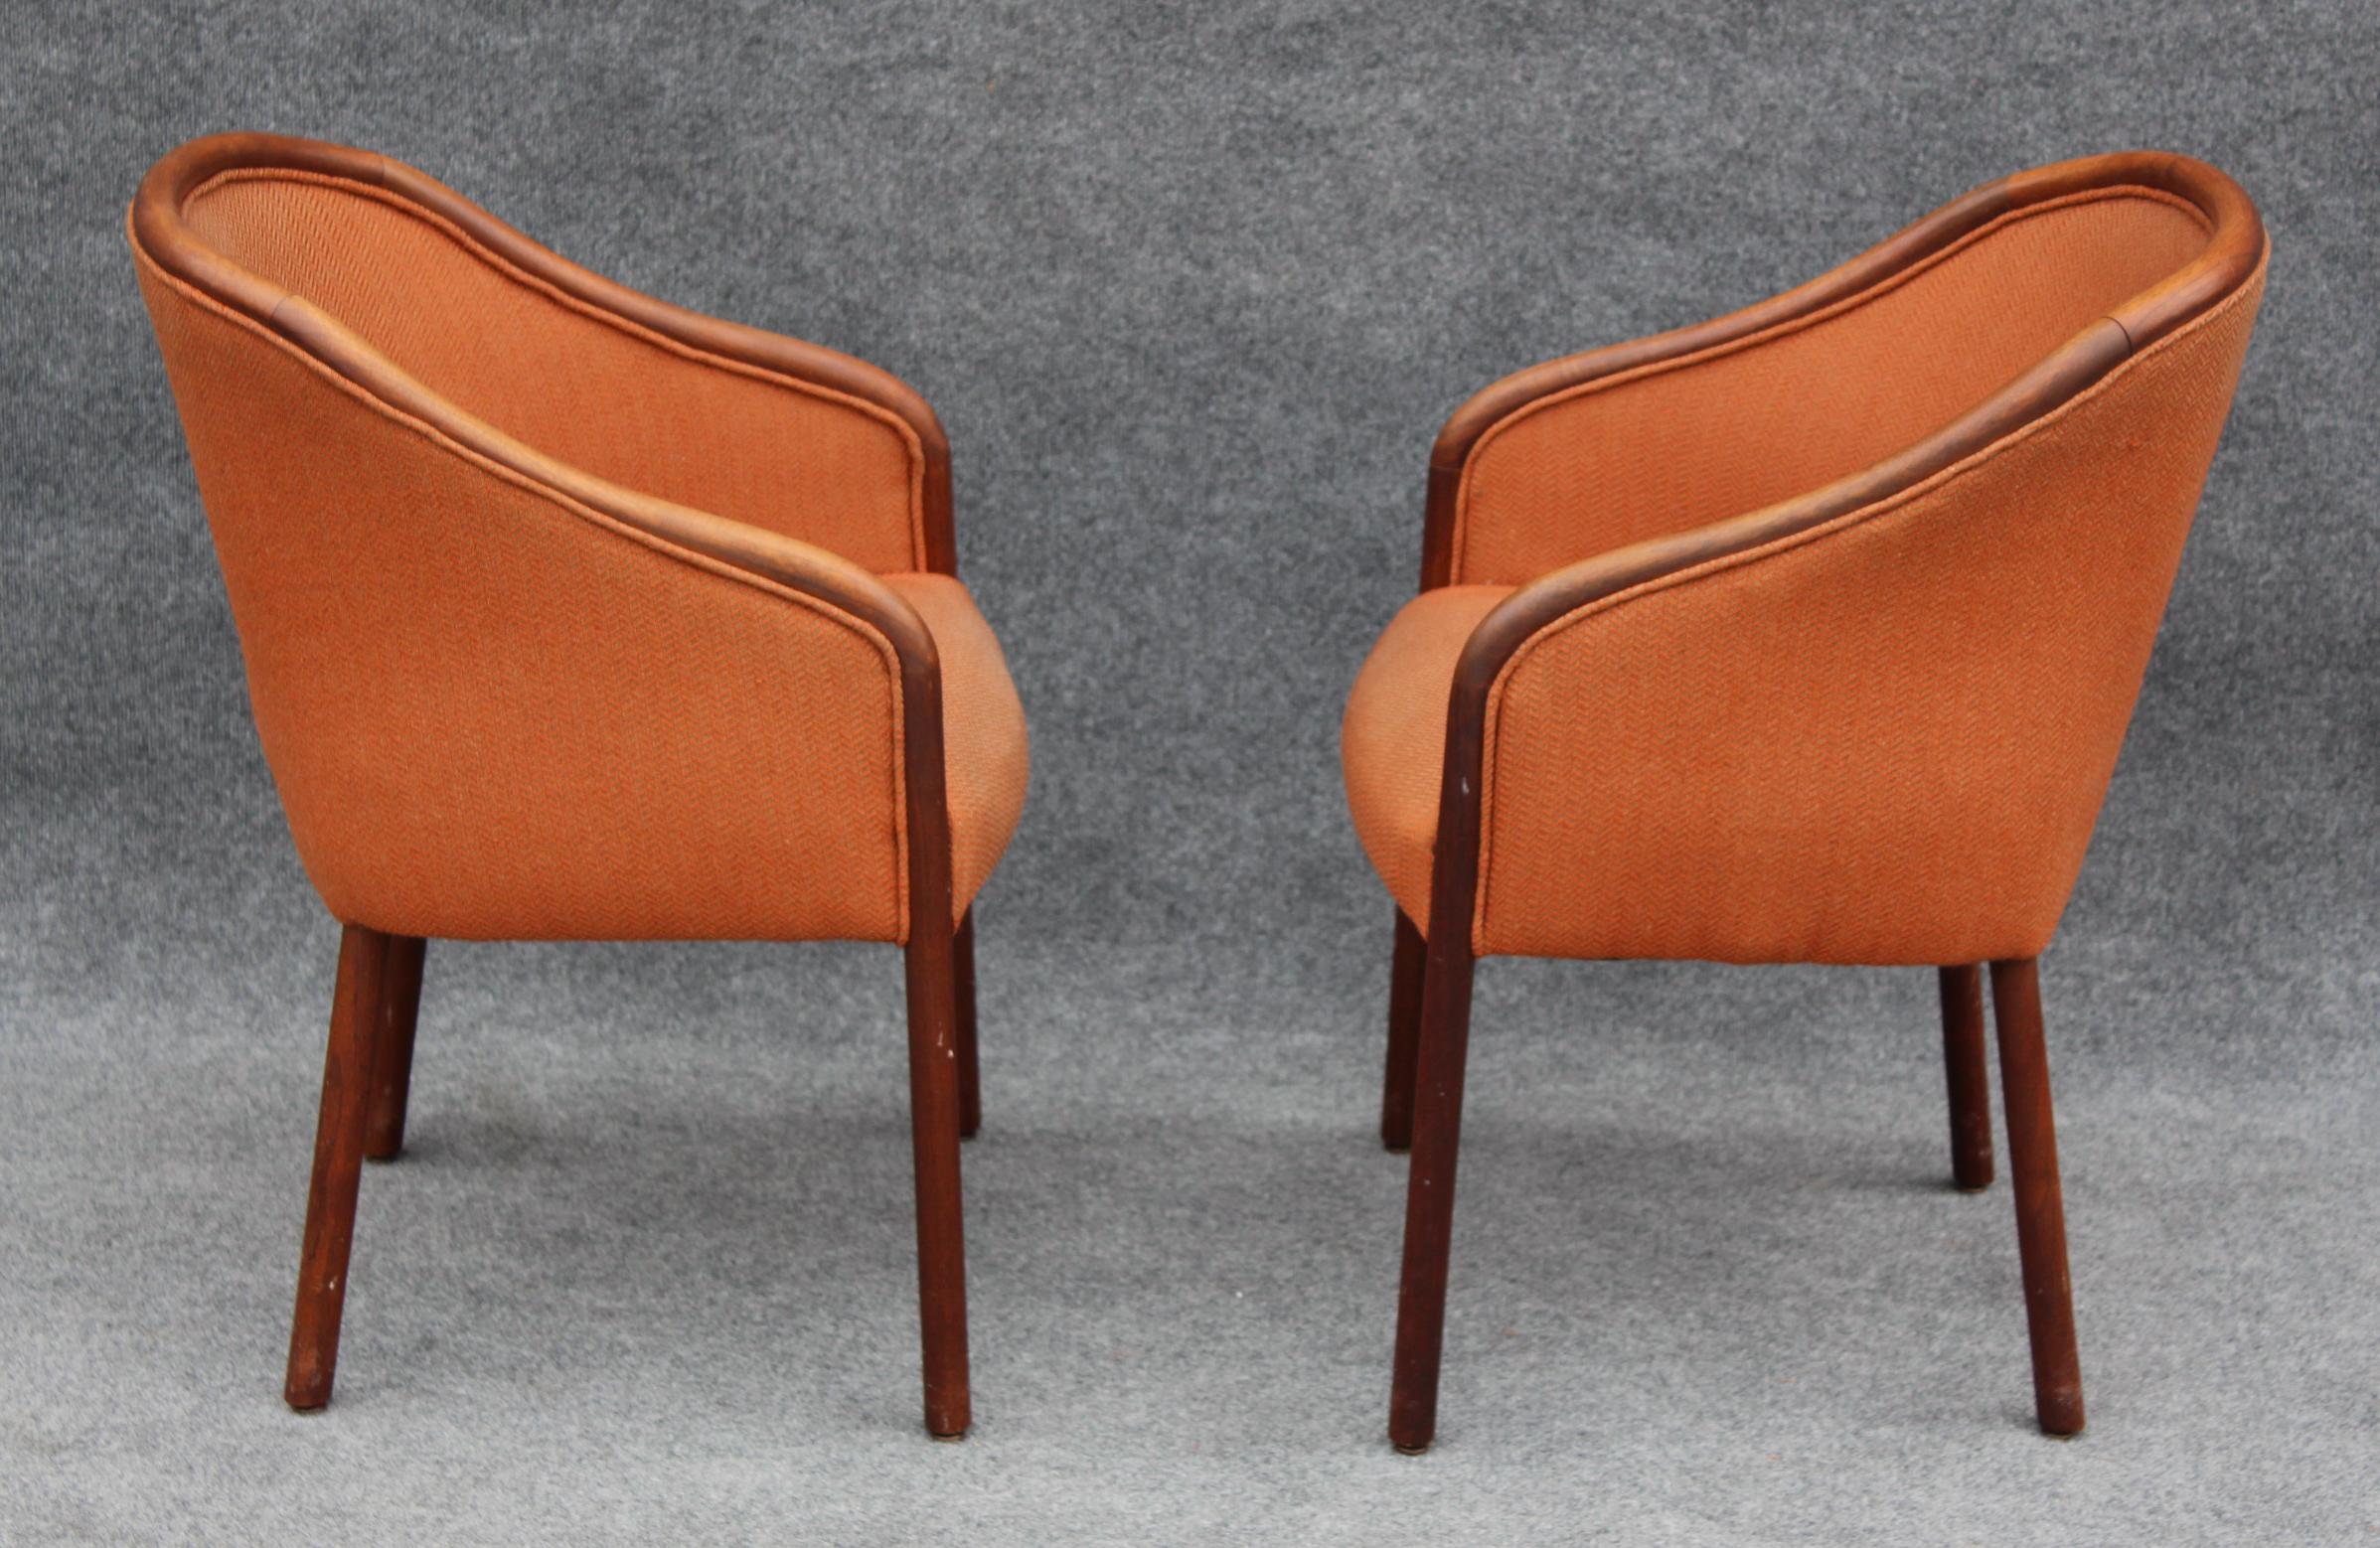 Late 20th Century Pair of Mid-Century Modern Walnut Armchair Side Chairs After Ward Bennett